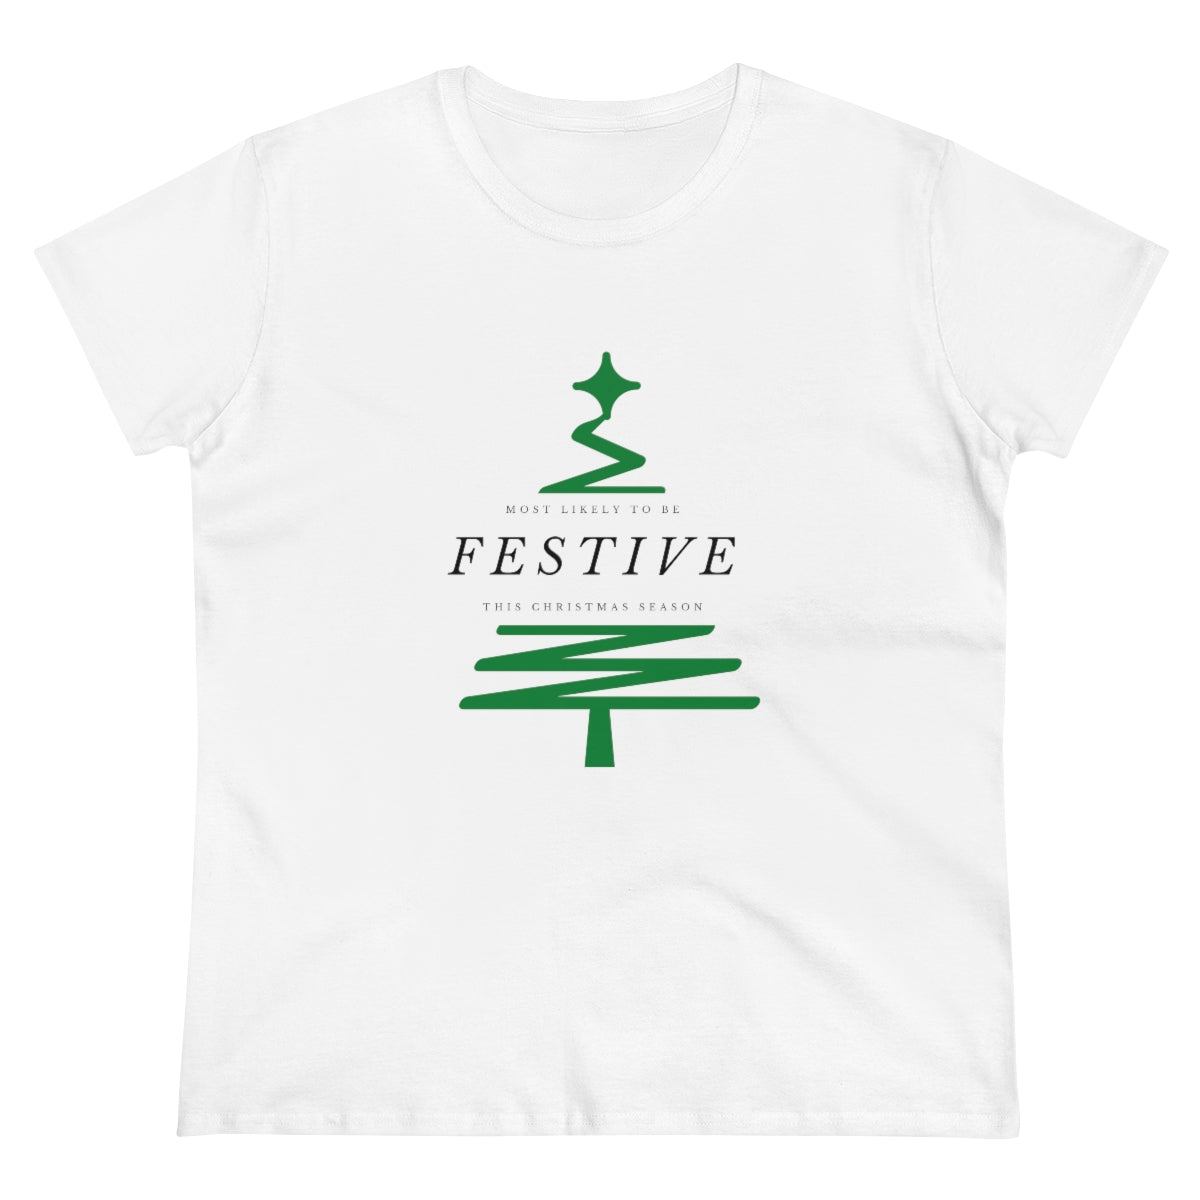 Most Likely to Be Festive - Christmas Tee